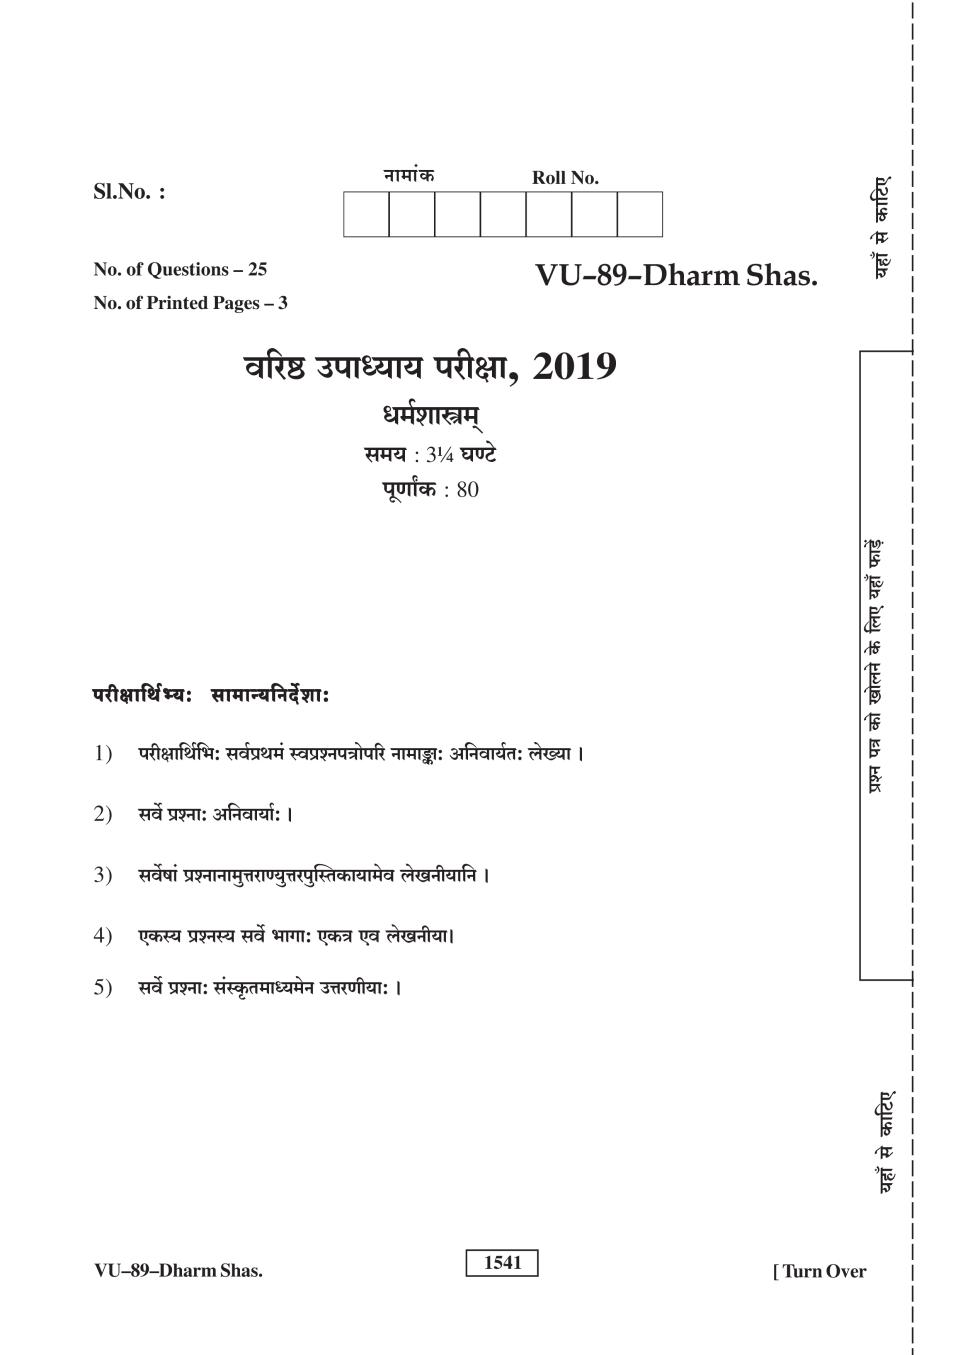 Rajasthan Board V Upadhyay Dharma Shastra Question Paper 2019 - Page 1